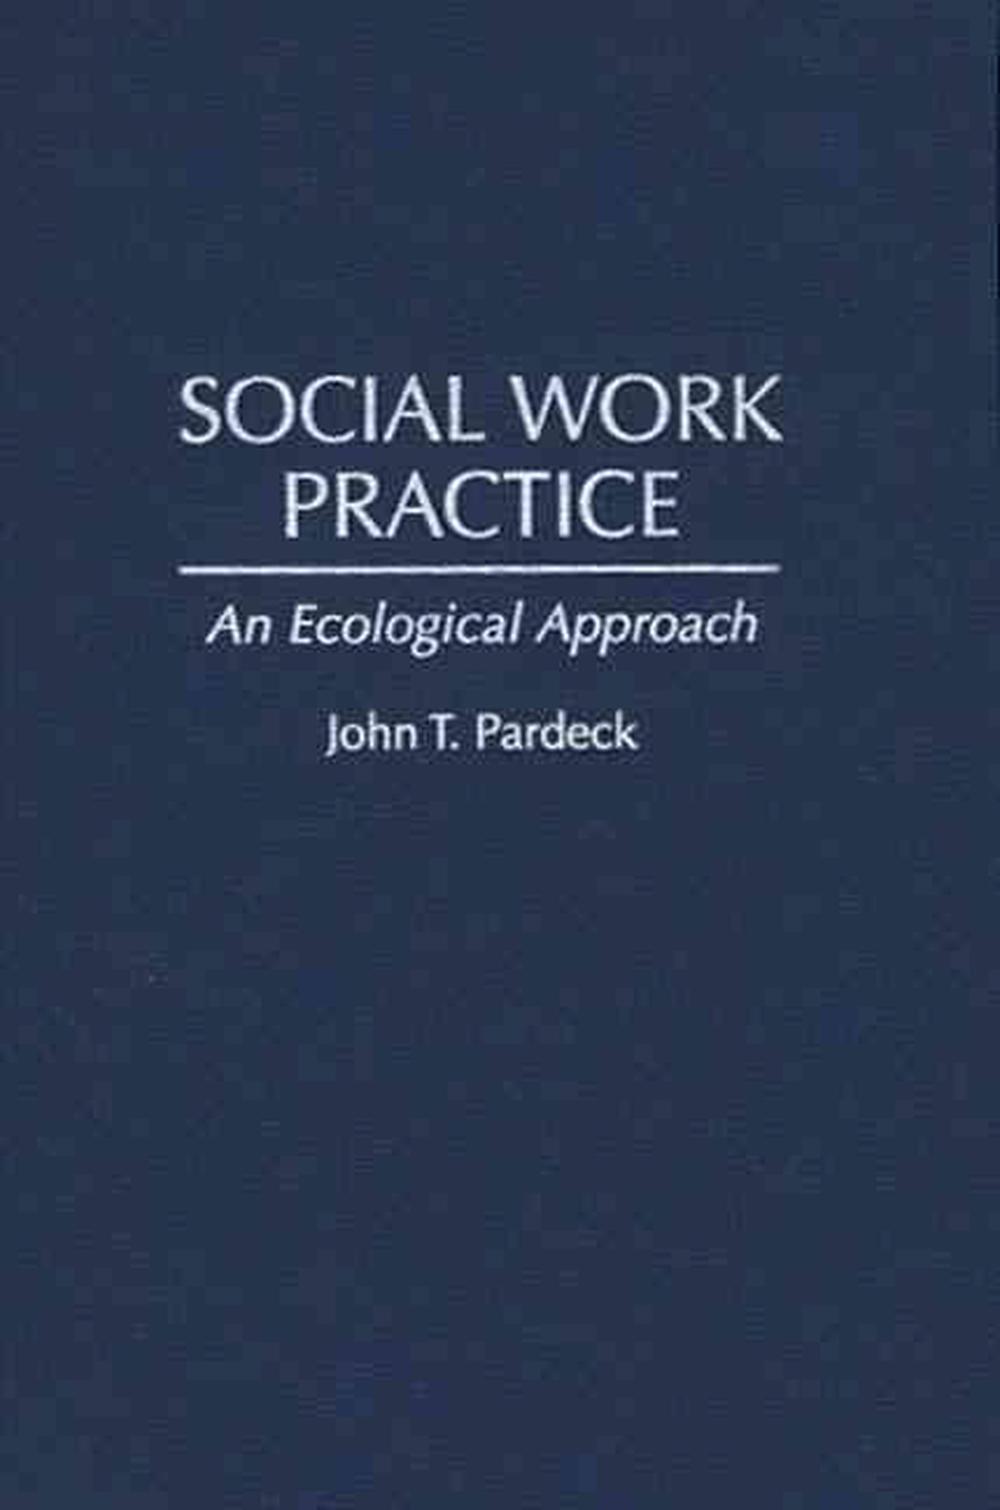 ecological approach in social work practice